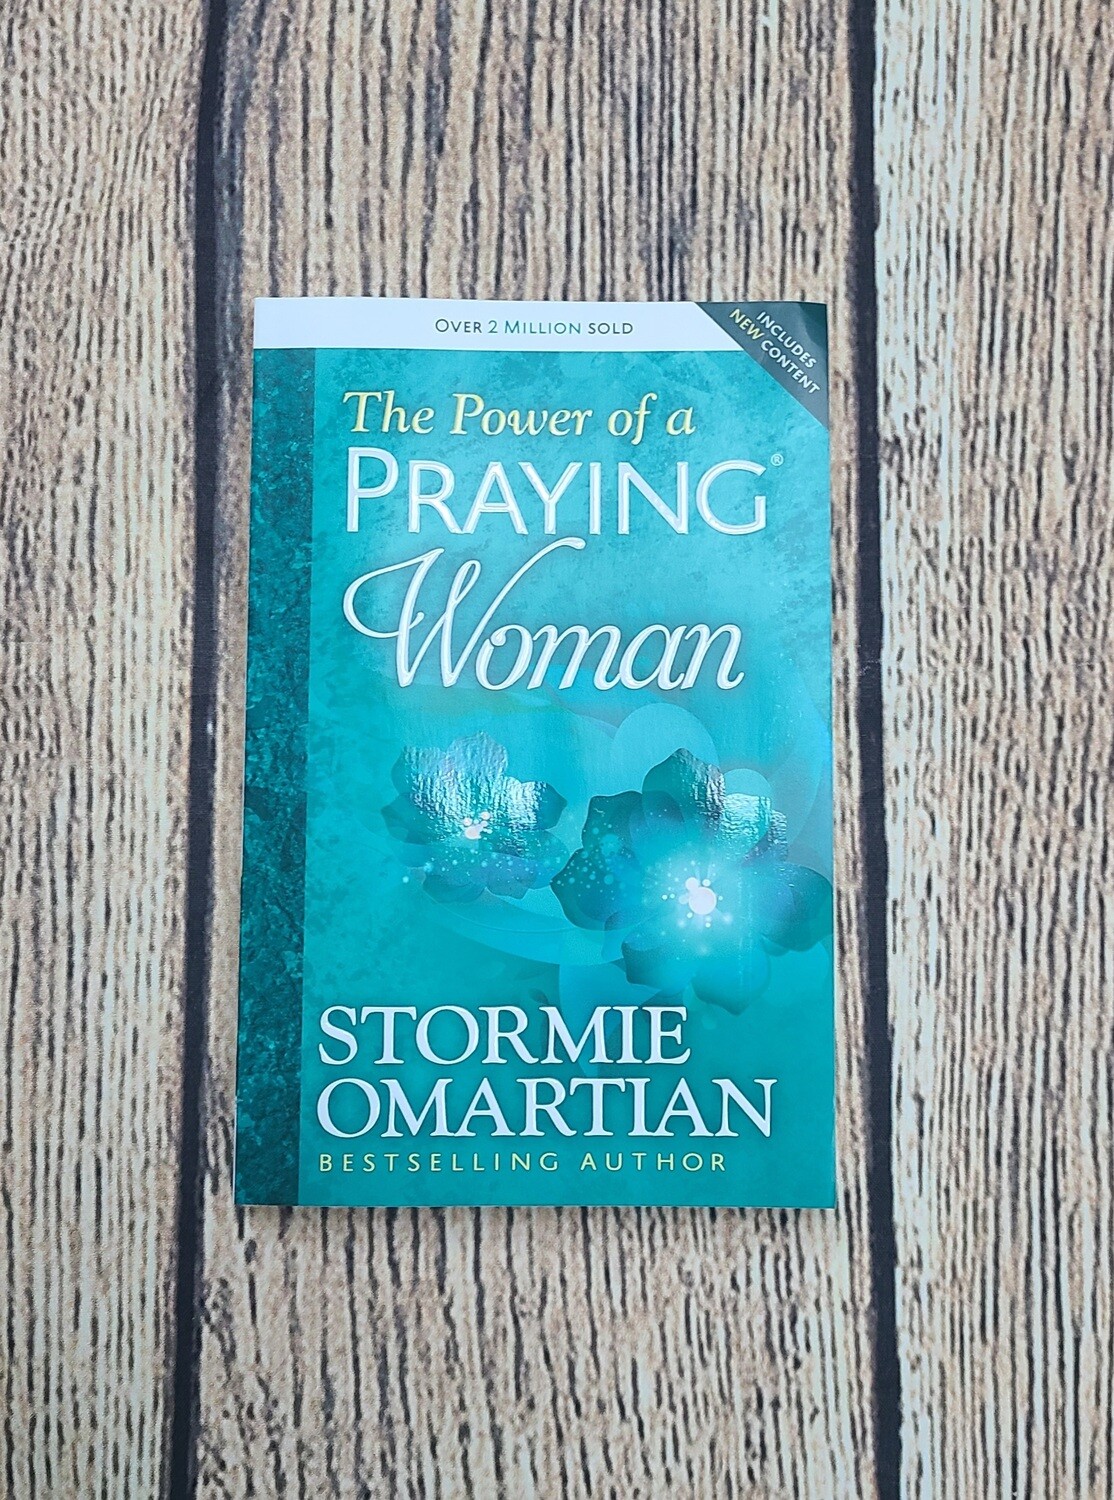 The Power of a Praying Woman by Stormie O'Martian - Paperback - New